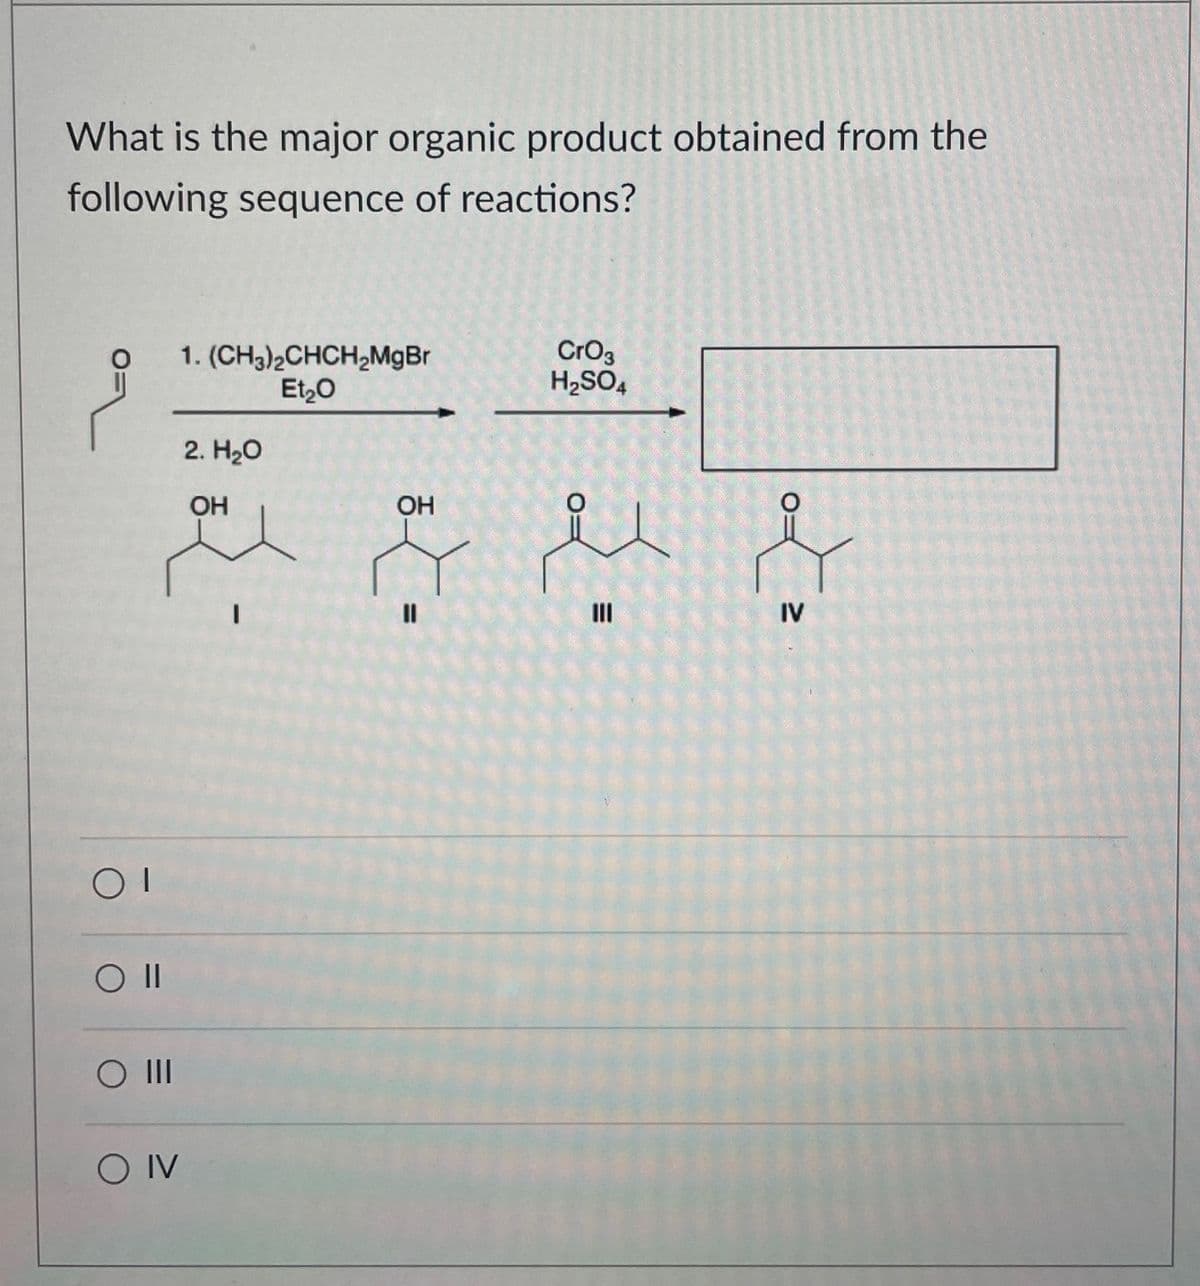 OI
O II
○ III
O IV
What is the major organic product obtained from the
following sequence of reactions?
1. (CH3)2CHCH2MgBr
Et₂O
2. H₂O
OH
OH
I
=
CrO3
H2SO4
=
III
IV
O